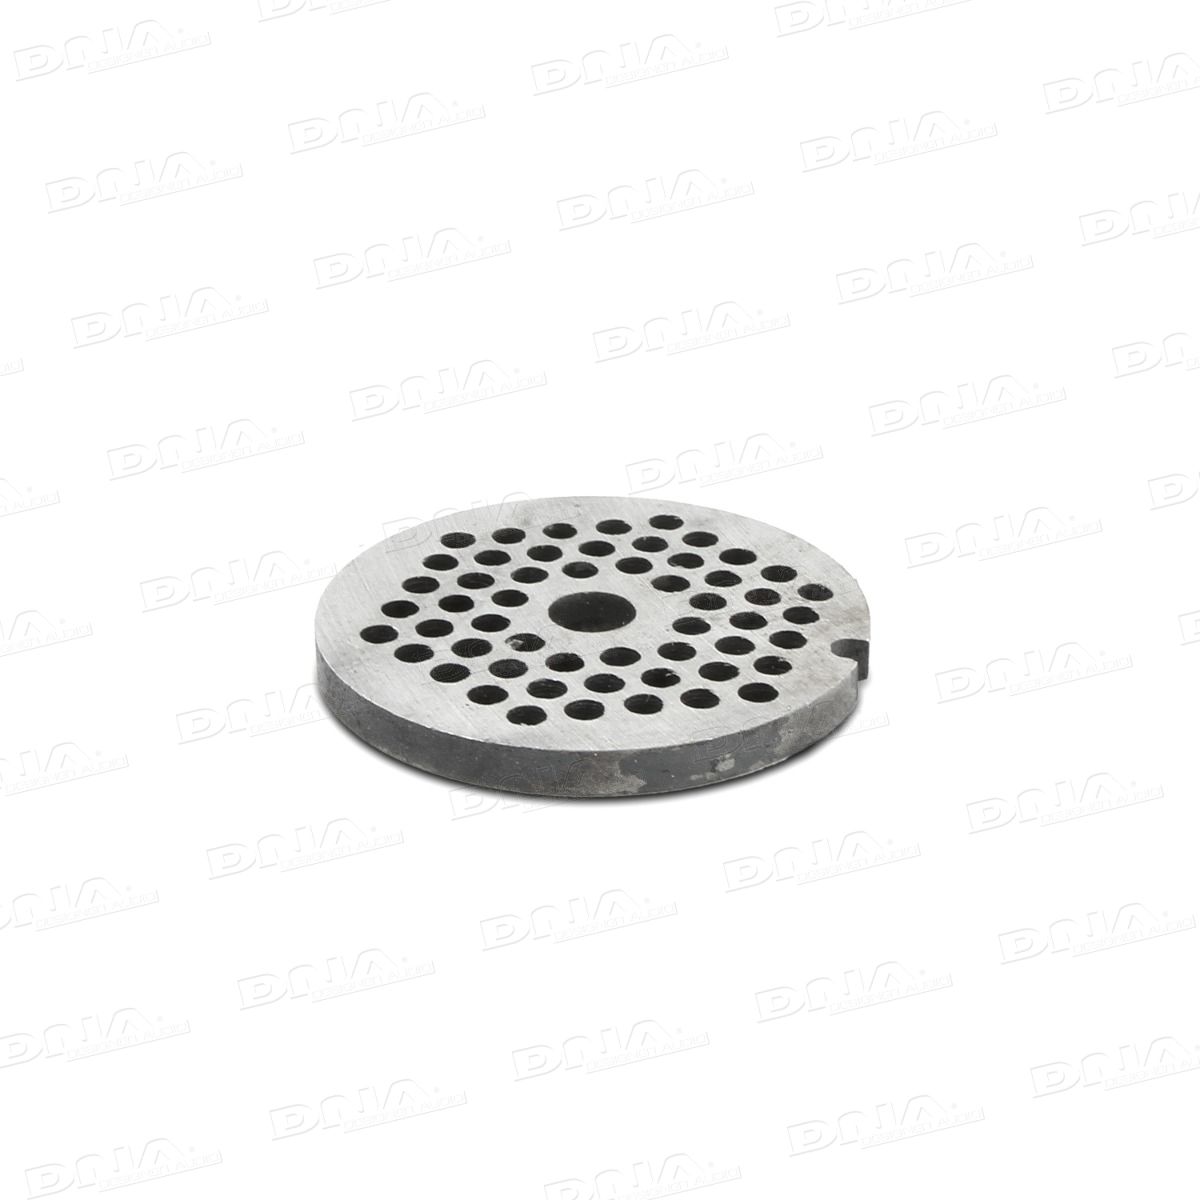 XXX MARINE BURLEY MINCER SMALL (SIZE 12) - 8mm DIAMETER HOLE CUTTING PLATE - REEL 'N' DEAL TACKLE